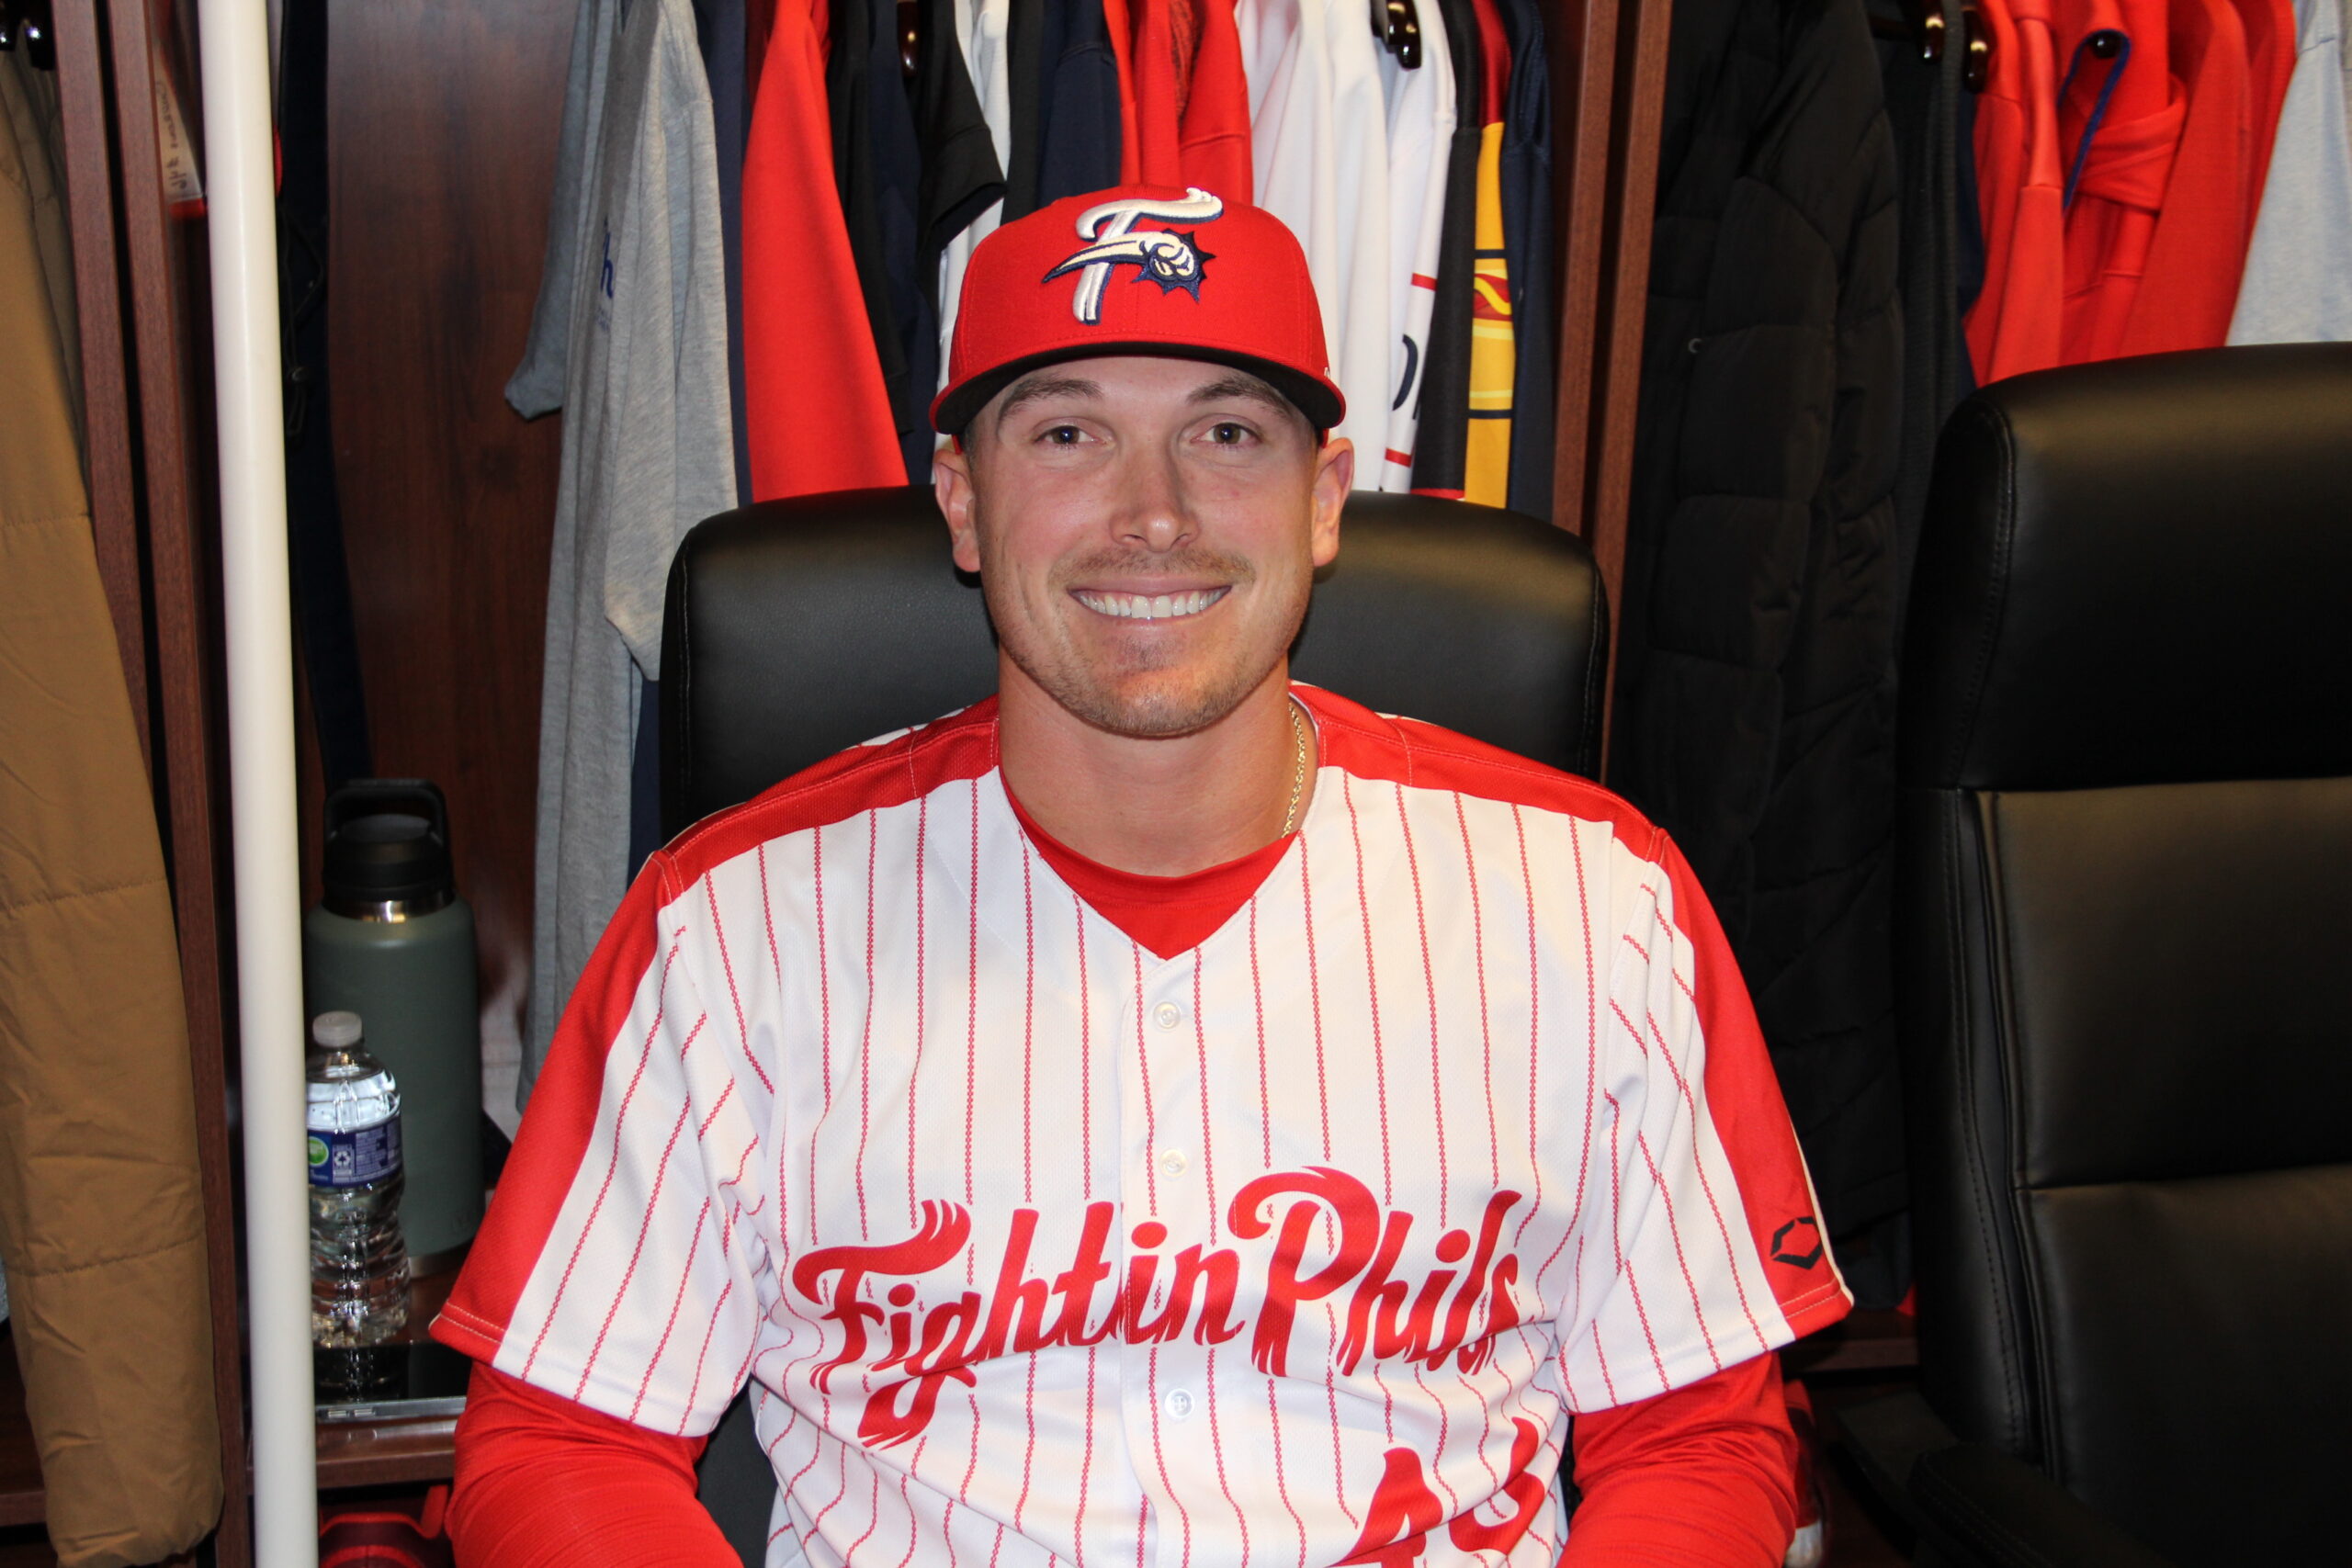 Veteran pitcher Beau Burrows lands in Phillies system after 'weird' spring  | Phillies Nation - Your source for Philadelphia Phillies news, opinion,  history, rumors, events, and other fun stuff.